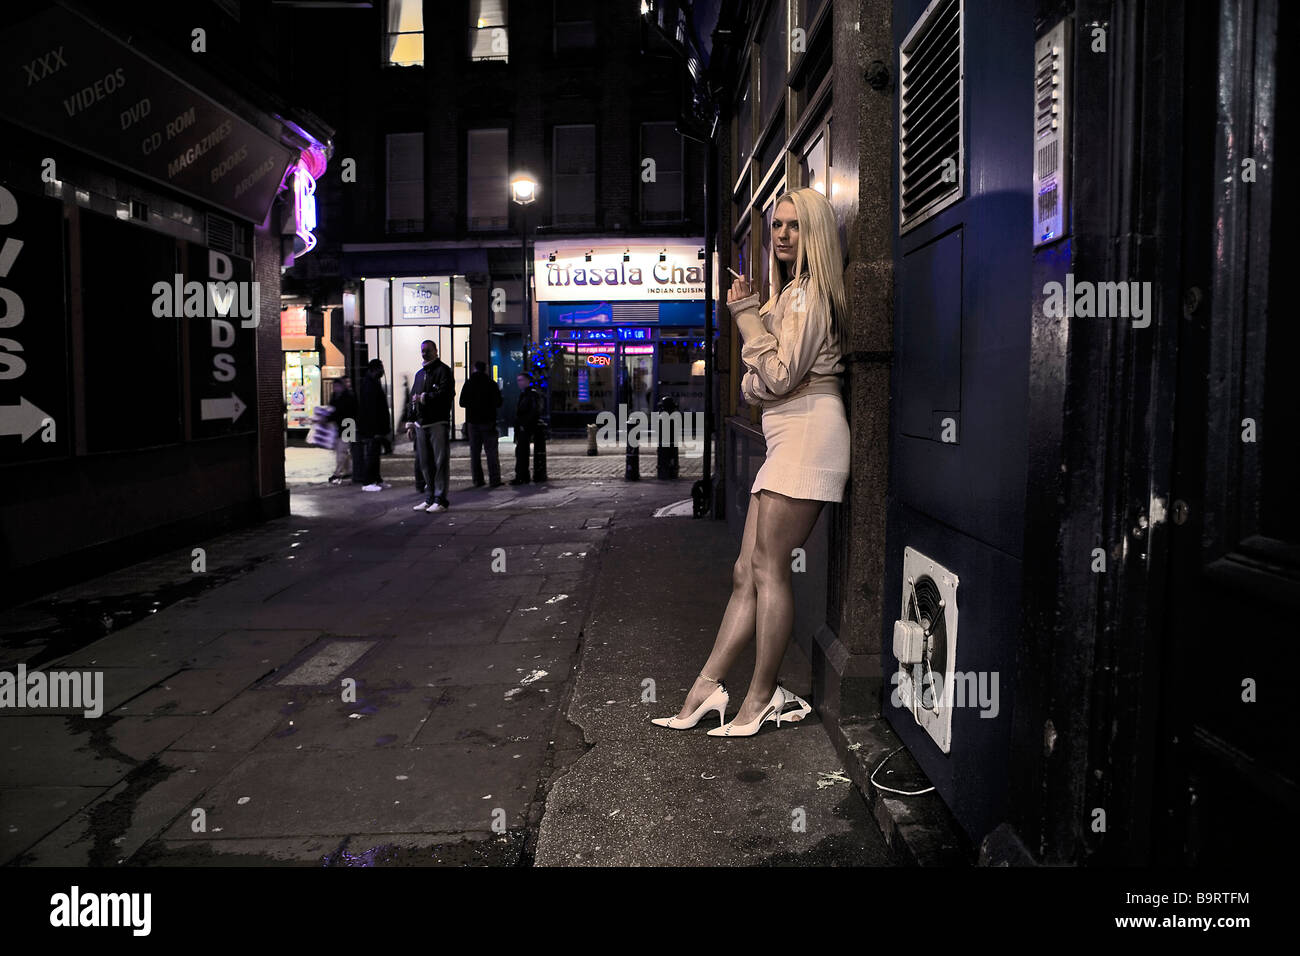 Working girl stands outside Soho London sex shop / strip joint Stock Photo  image